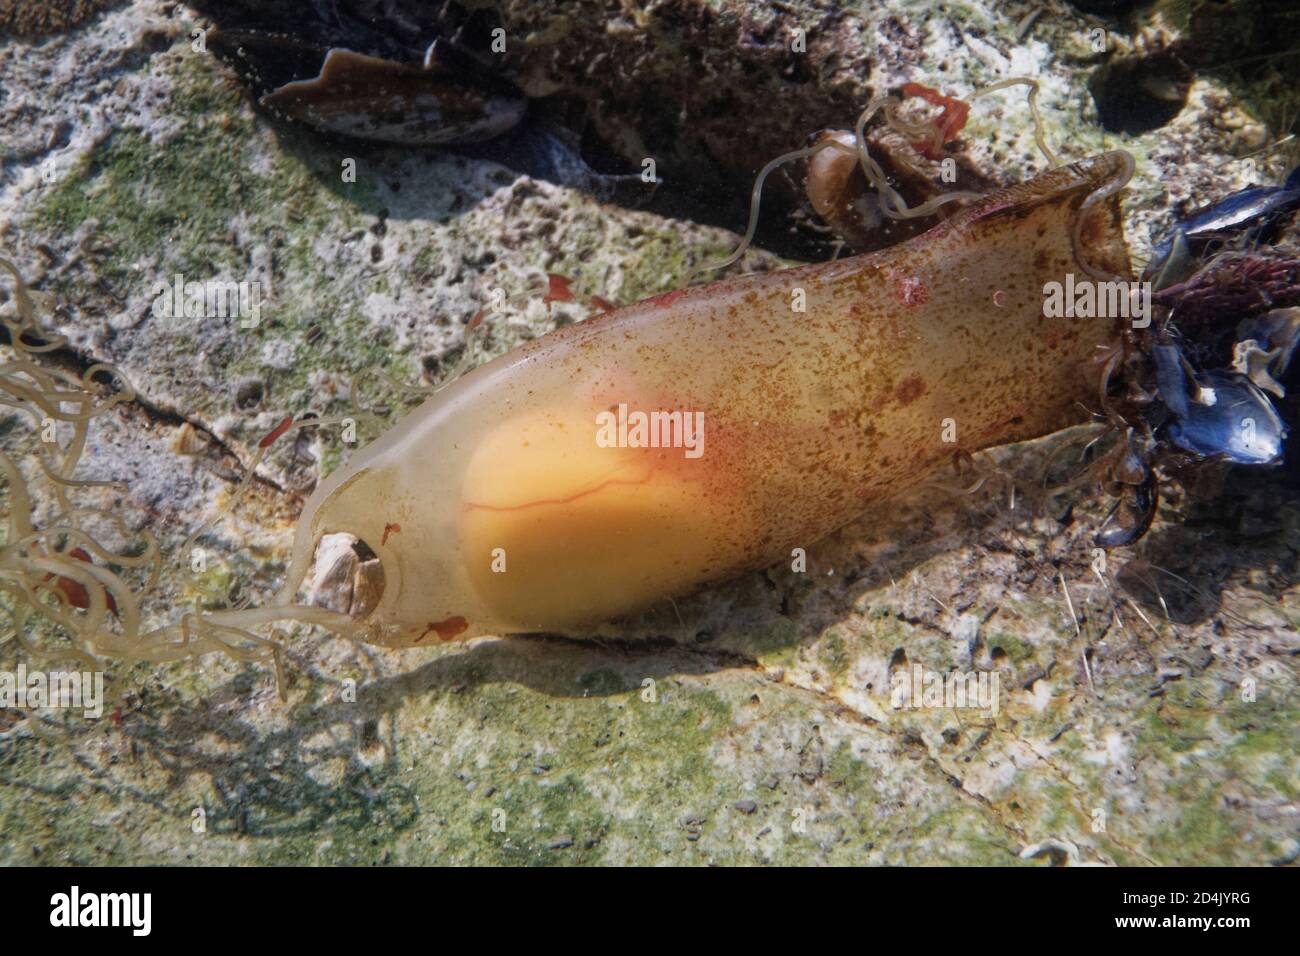 Mermaid's purse egg case of Lesser spotted catshark / Dogfish (Scyliorhinus canicula) in a rockpool with developing young fish and yolk visible inside Stock Photo